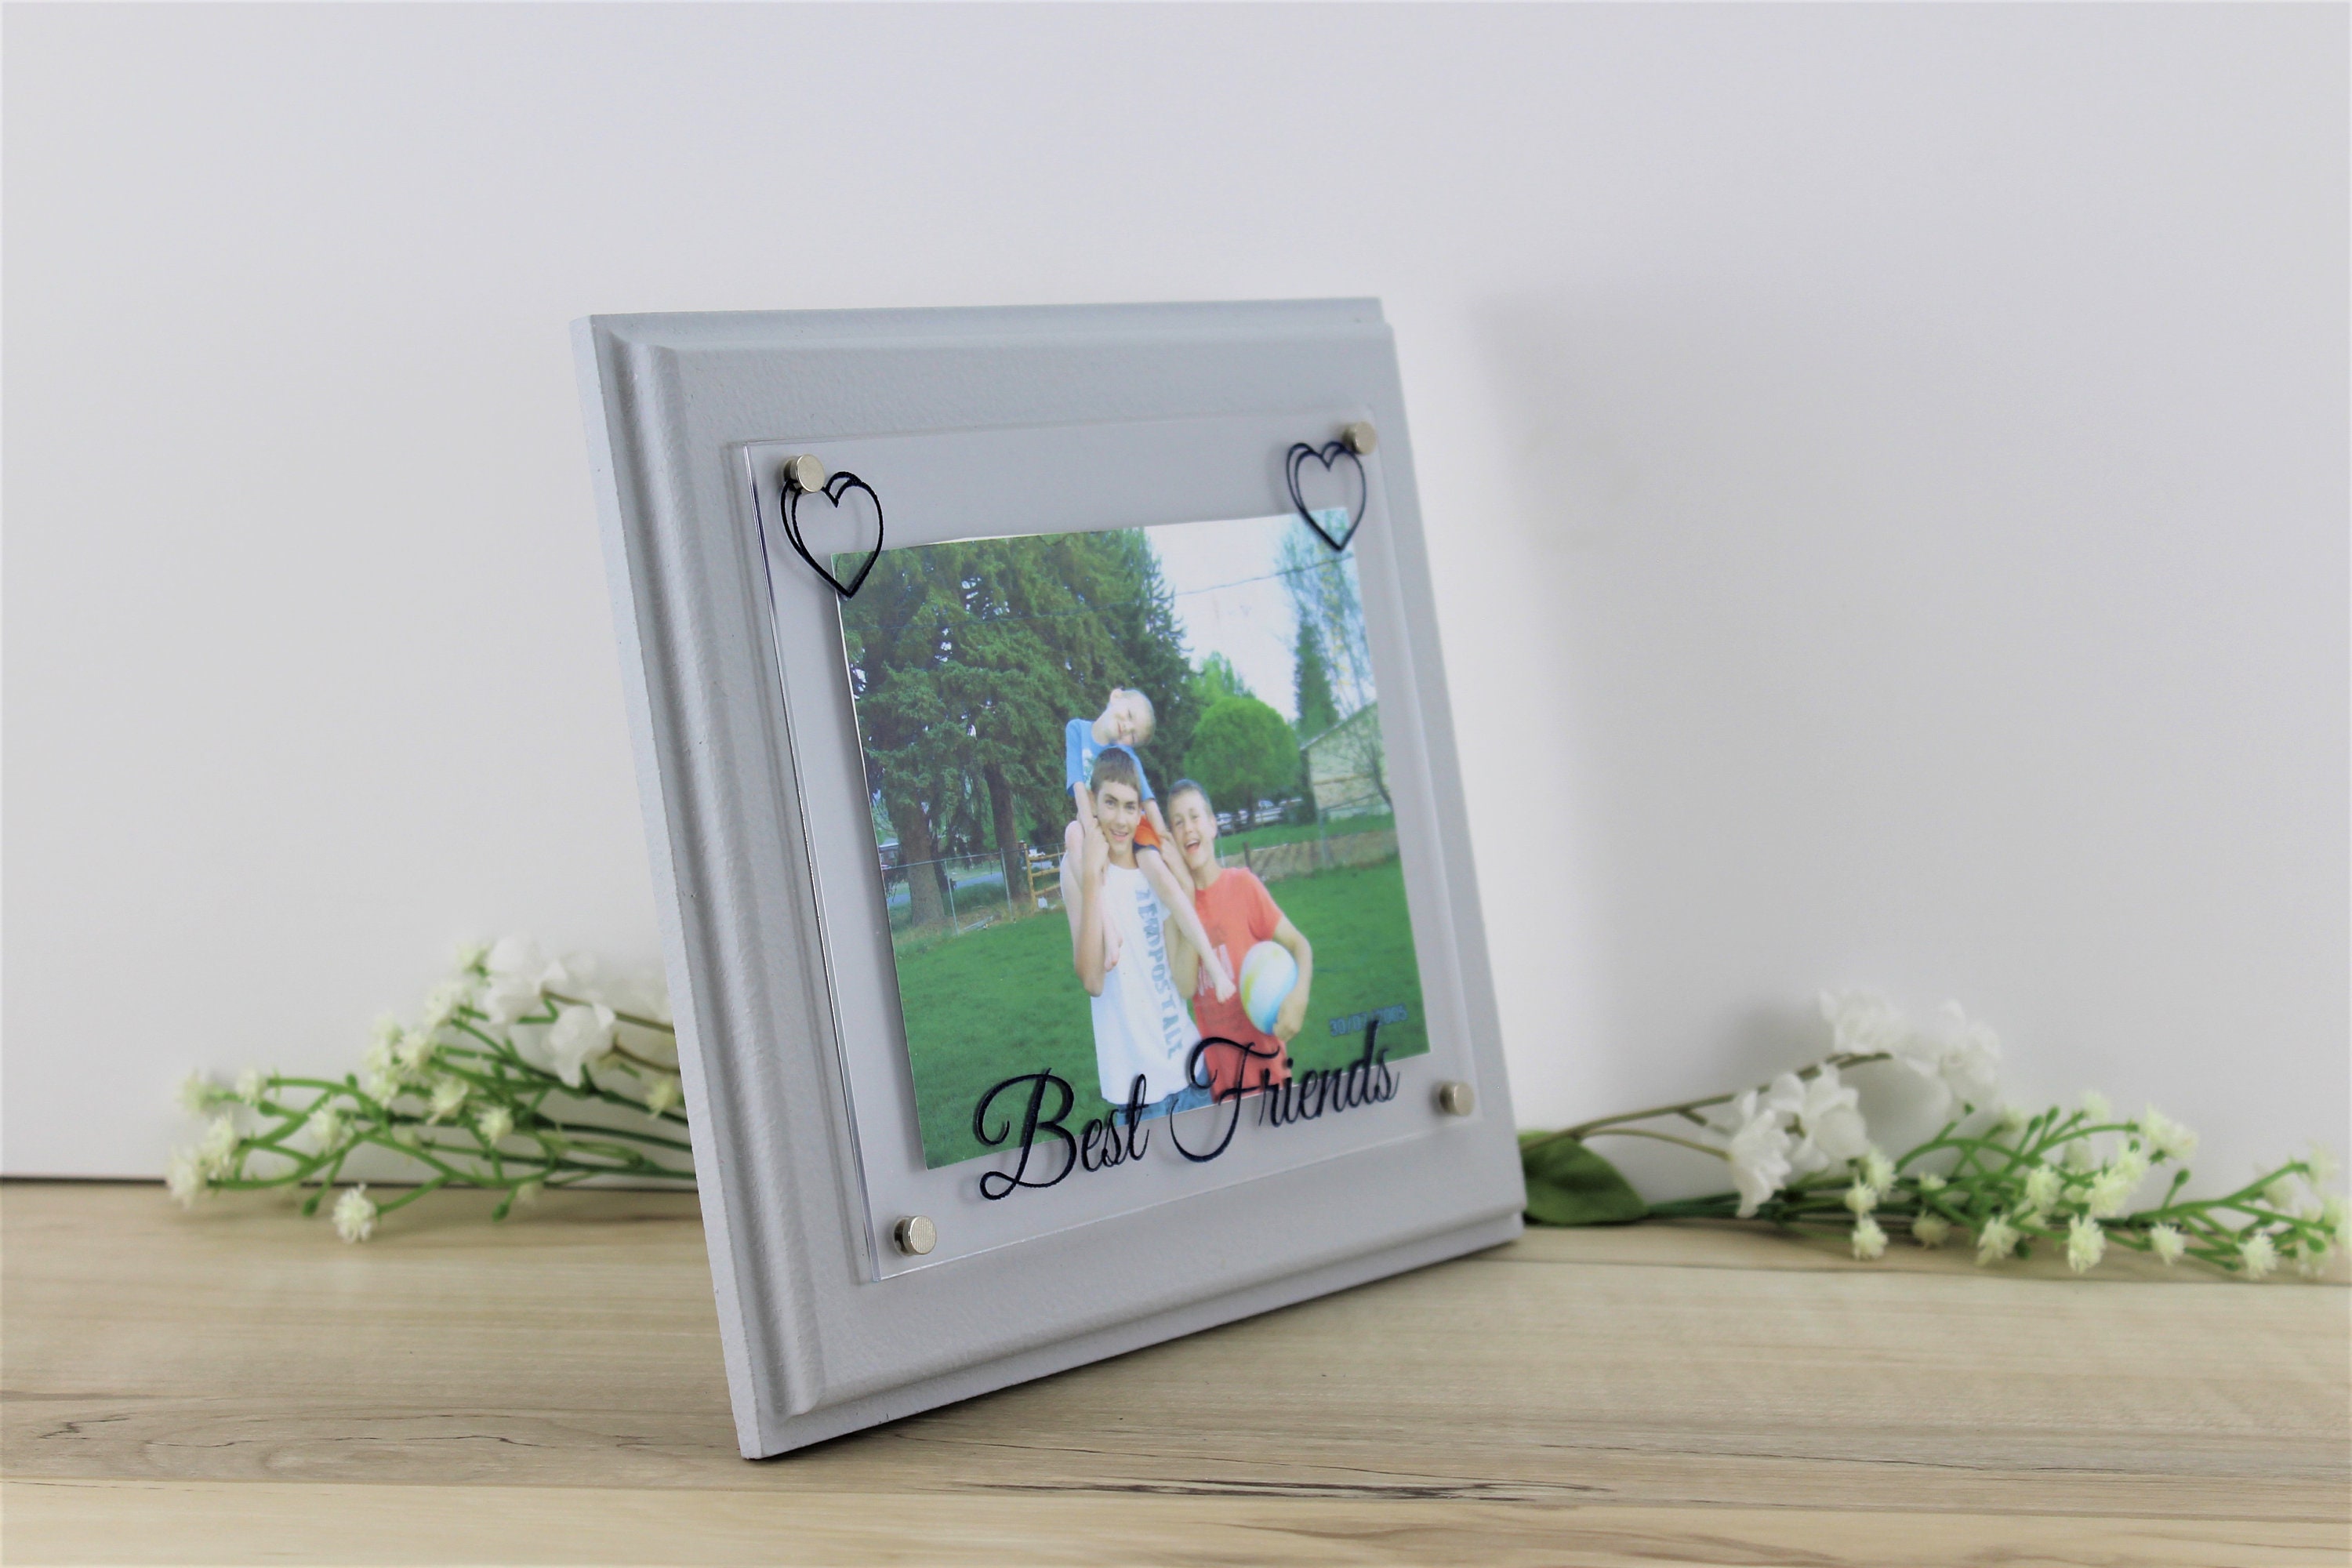 Best Friends, Grey Picture Frame, 4x6 Picture Frame, Photo Frame, Hearts,  Personalized, Custom Framed Wall Collage Sayings BFF Buddies Frame 